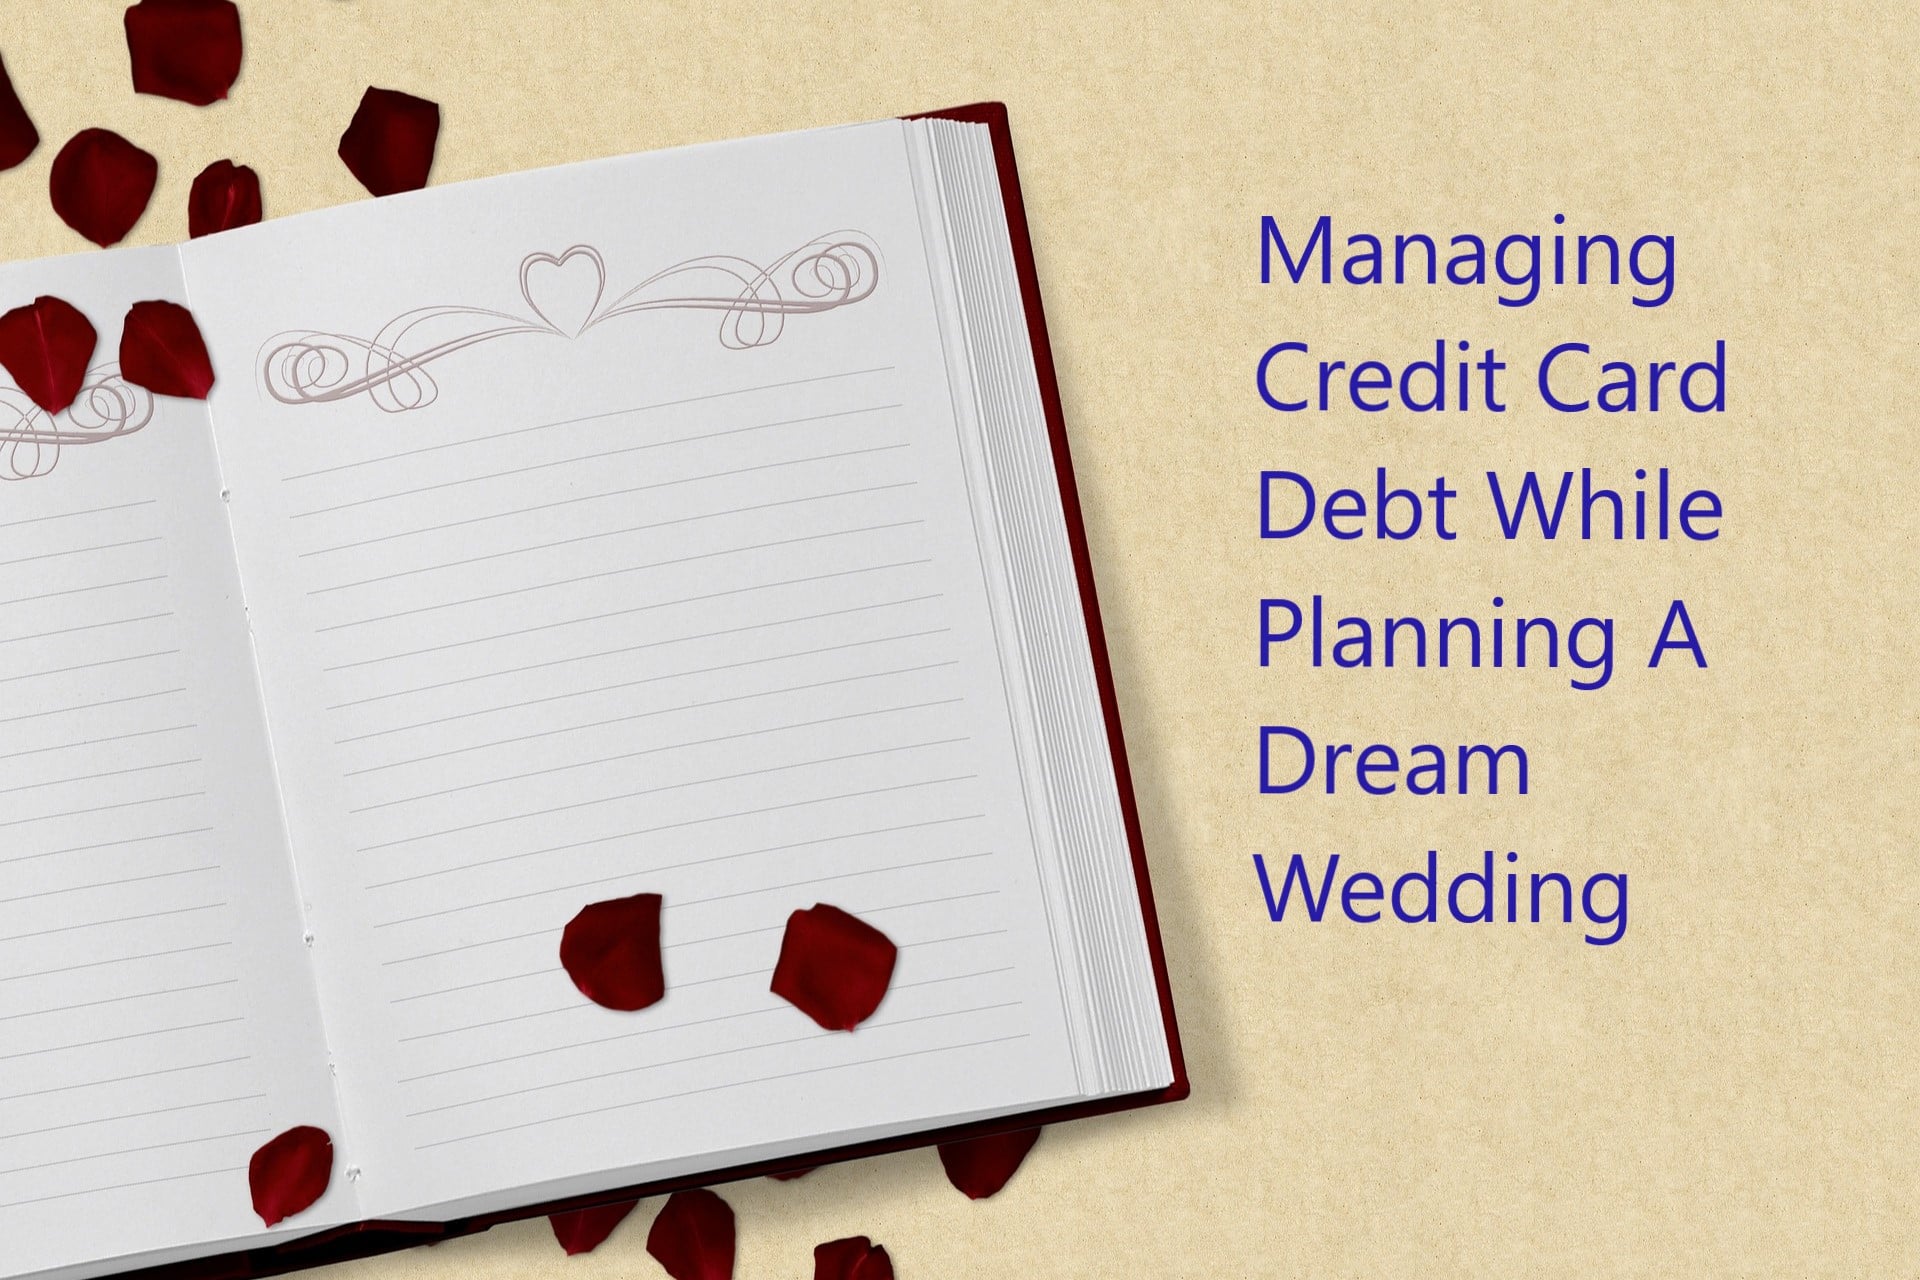 How to Manage Credit Card Debt While Planning A Wedding